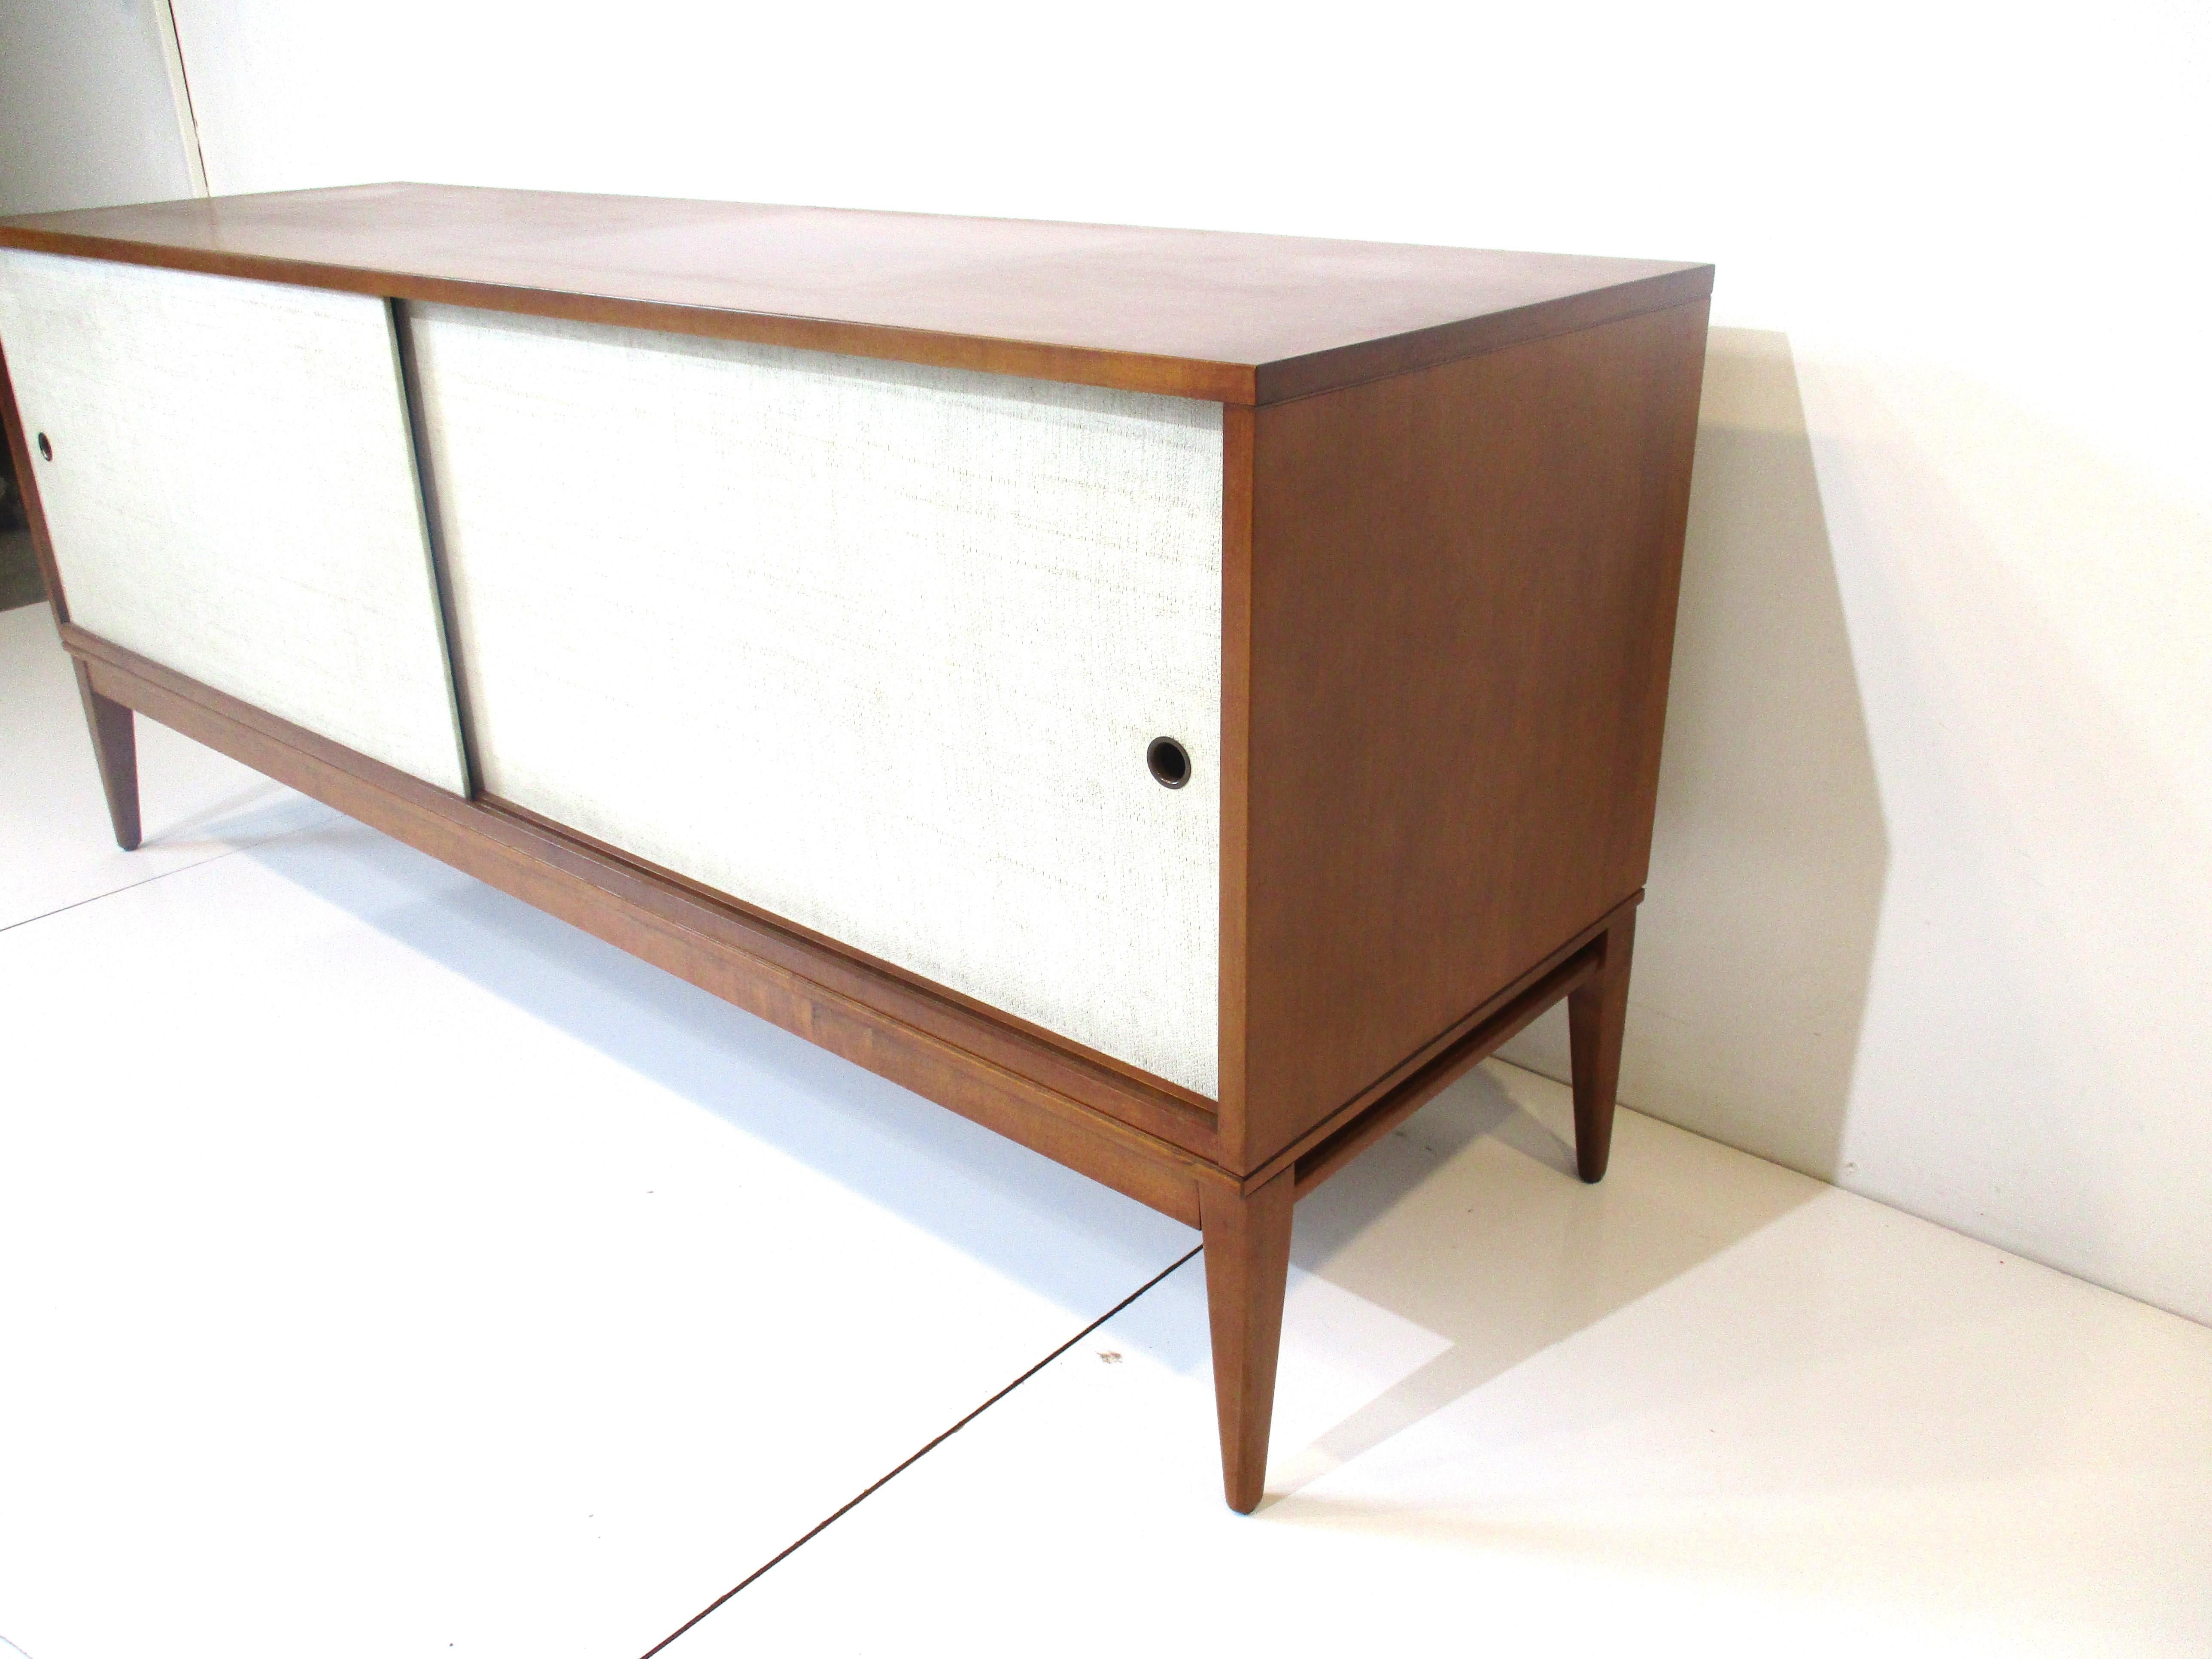 A low profile two sliding door credenza in a medium walnut toned finish with creamy beige door fronts. Metal finger holes for pulls and tapered legs to each corner, still retains the foil manufactures label to the backside designed by Paul McCobb